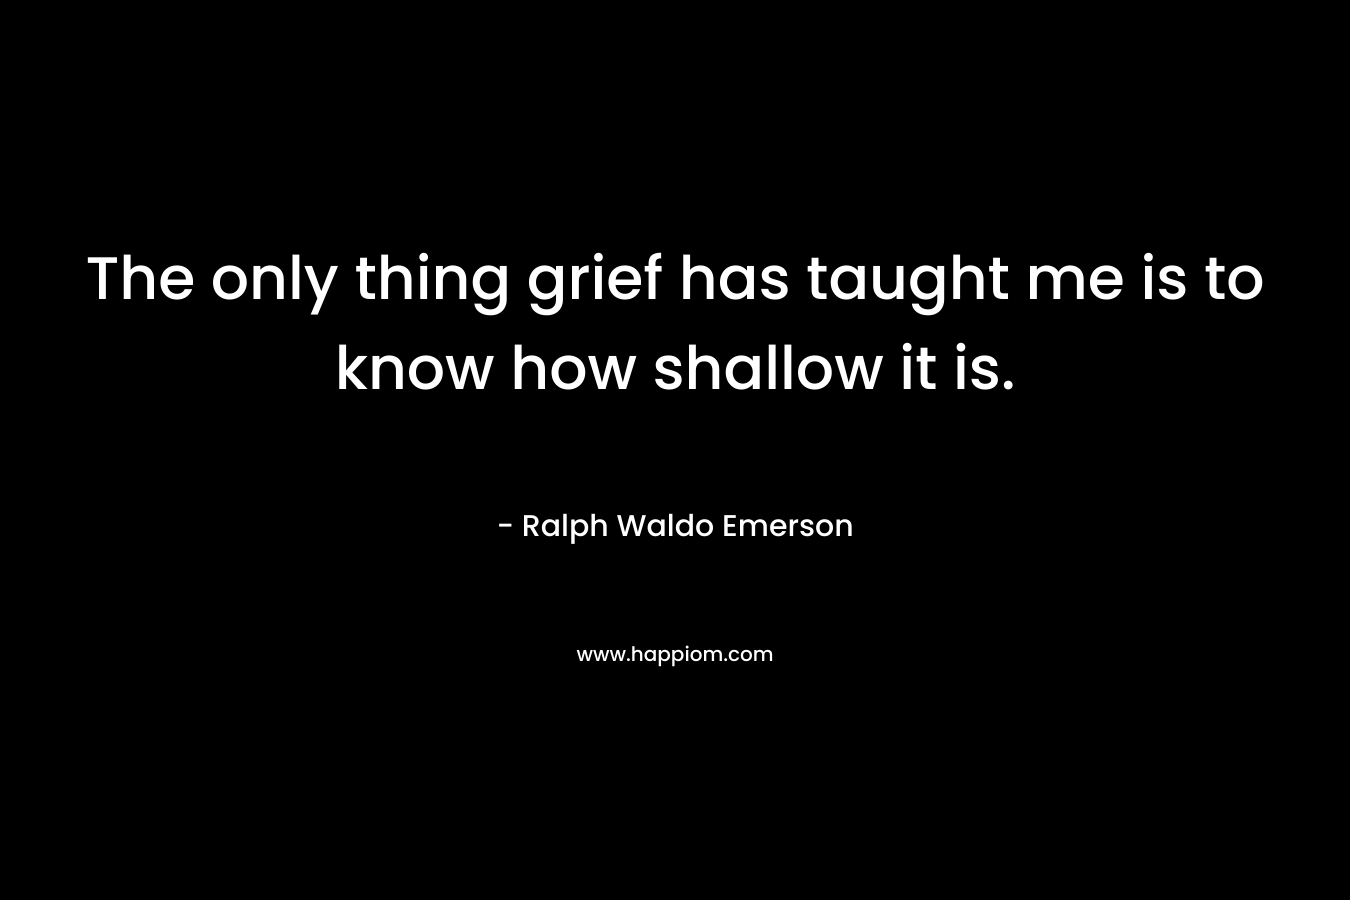 The only thing grief has taught me is to know how shallow it is.